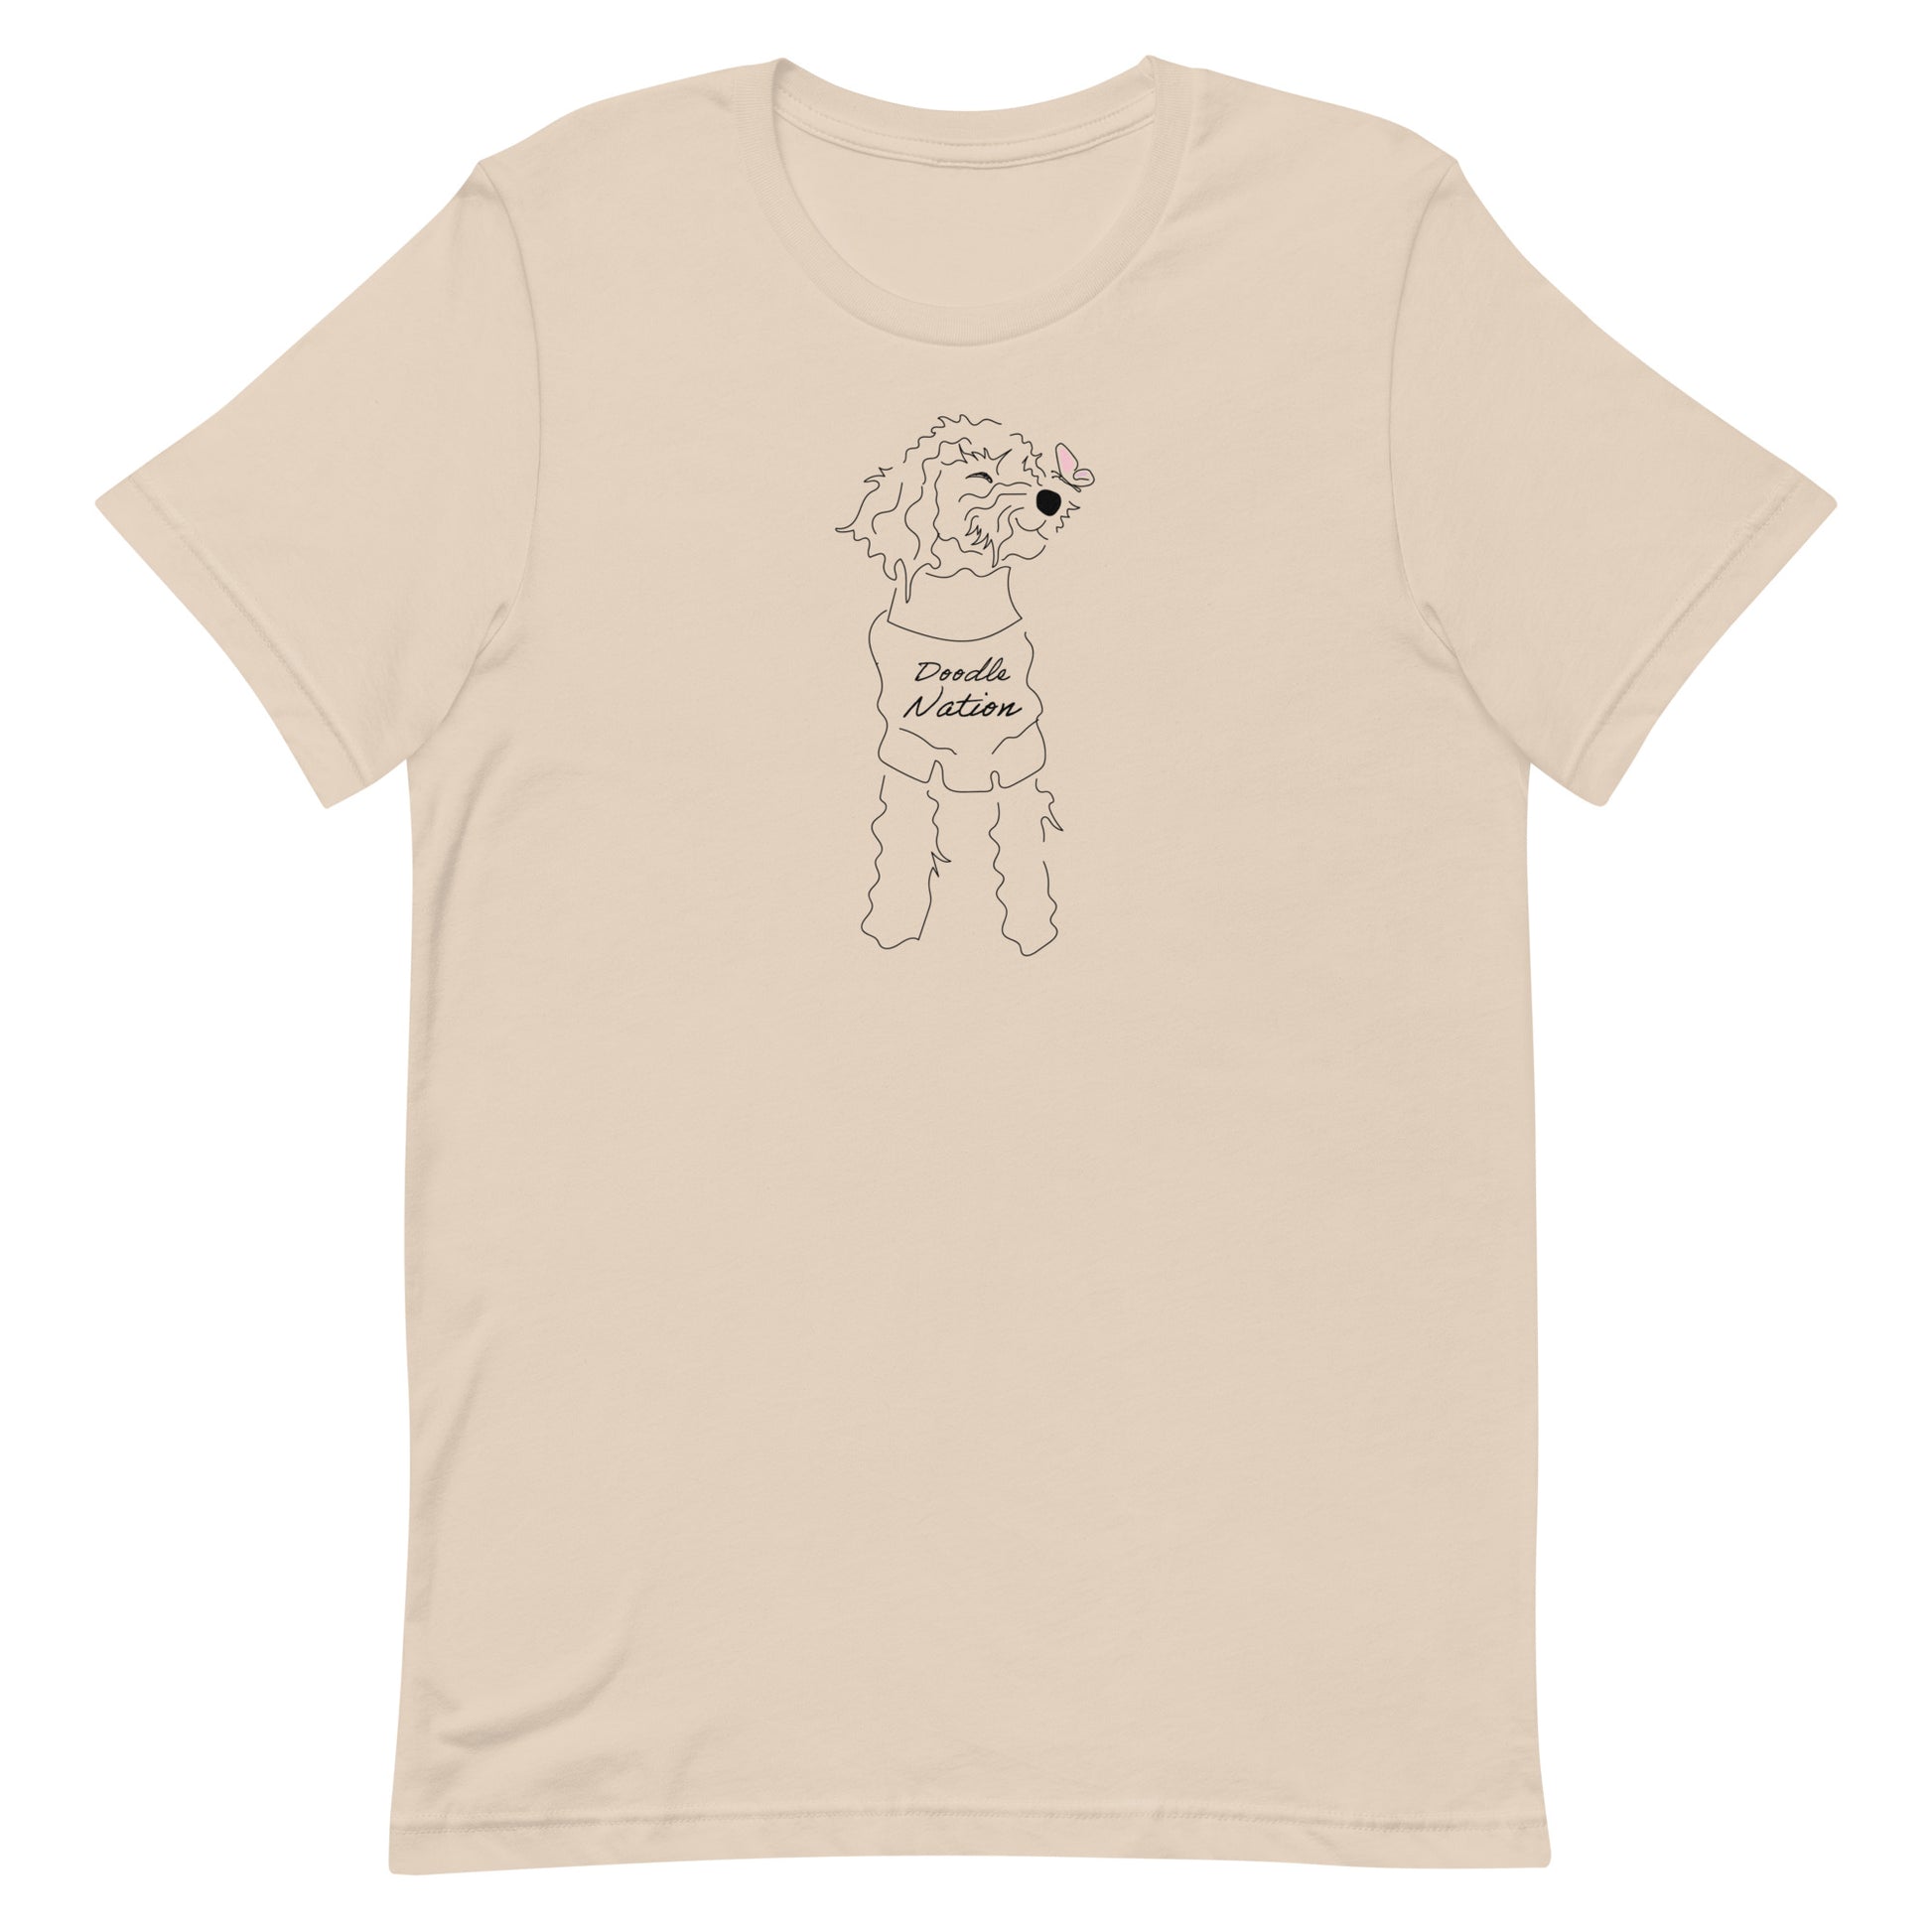 Goldendoodle t-shirt with Goldendoodle dog face and words "Doodle Nation" in cream color